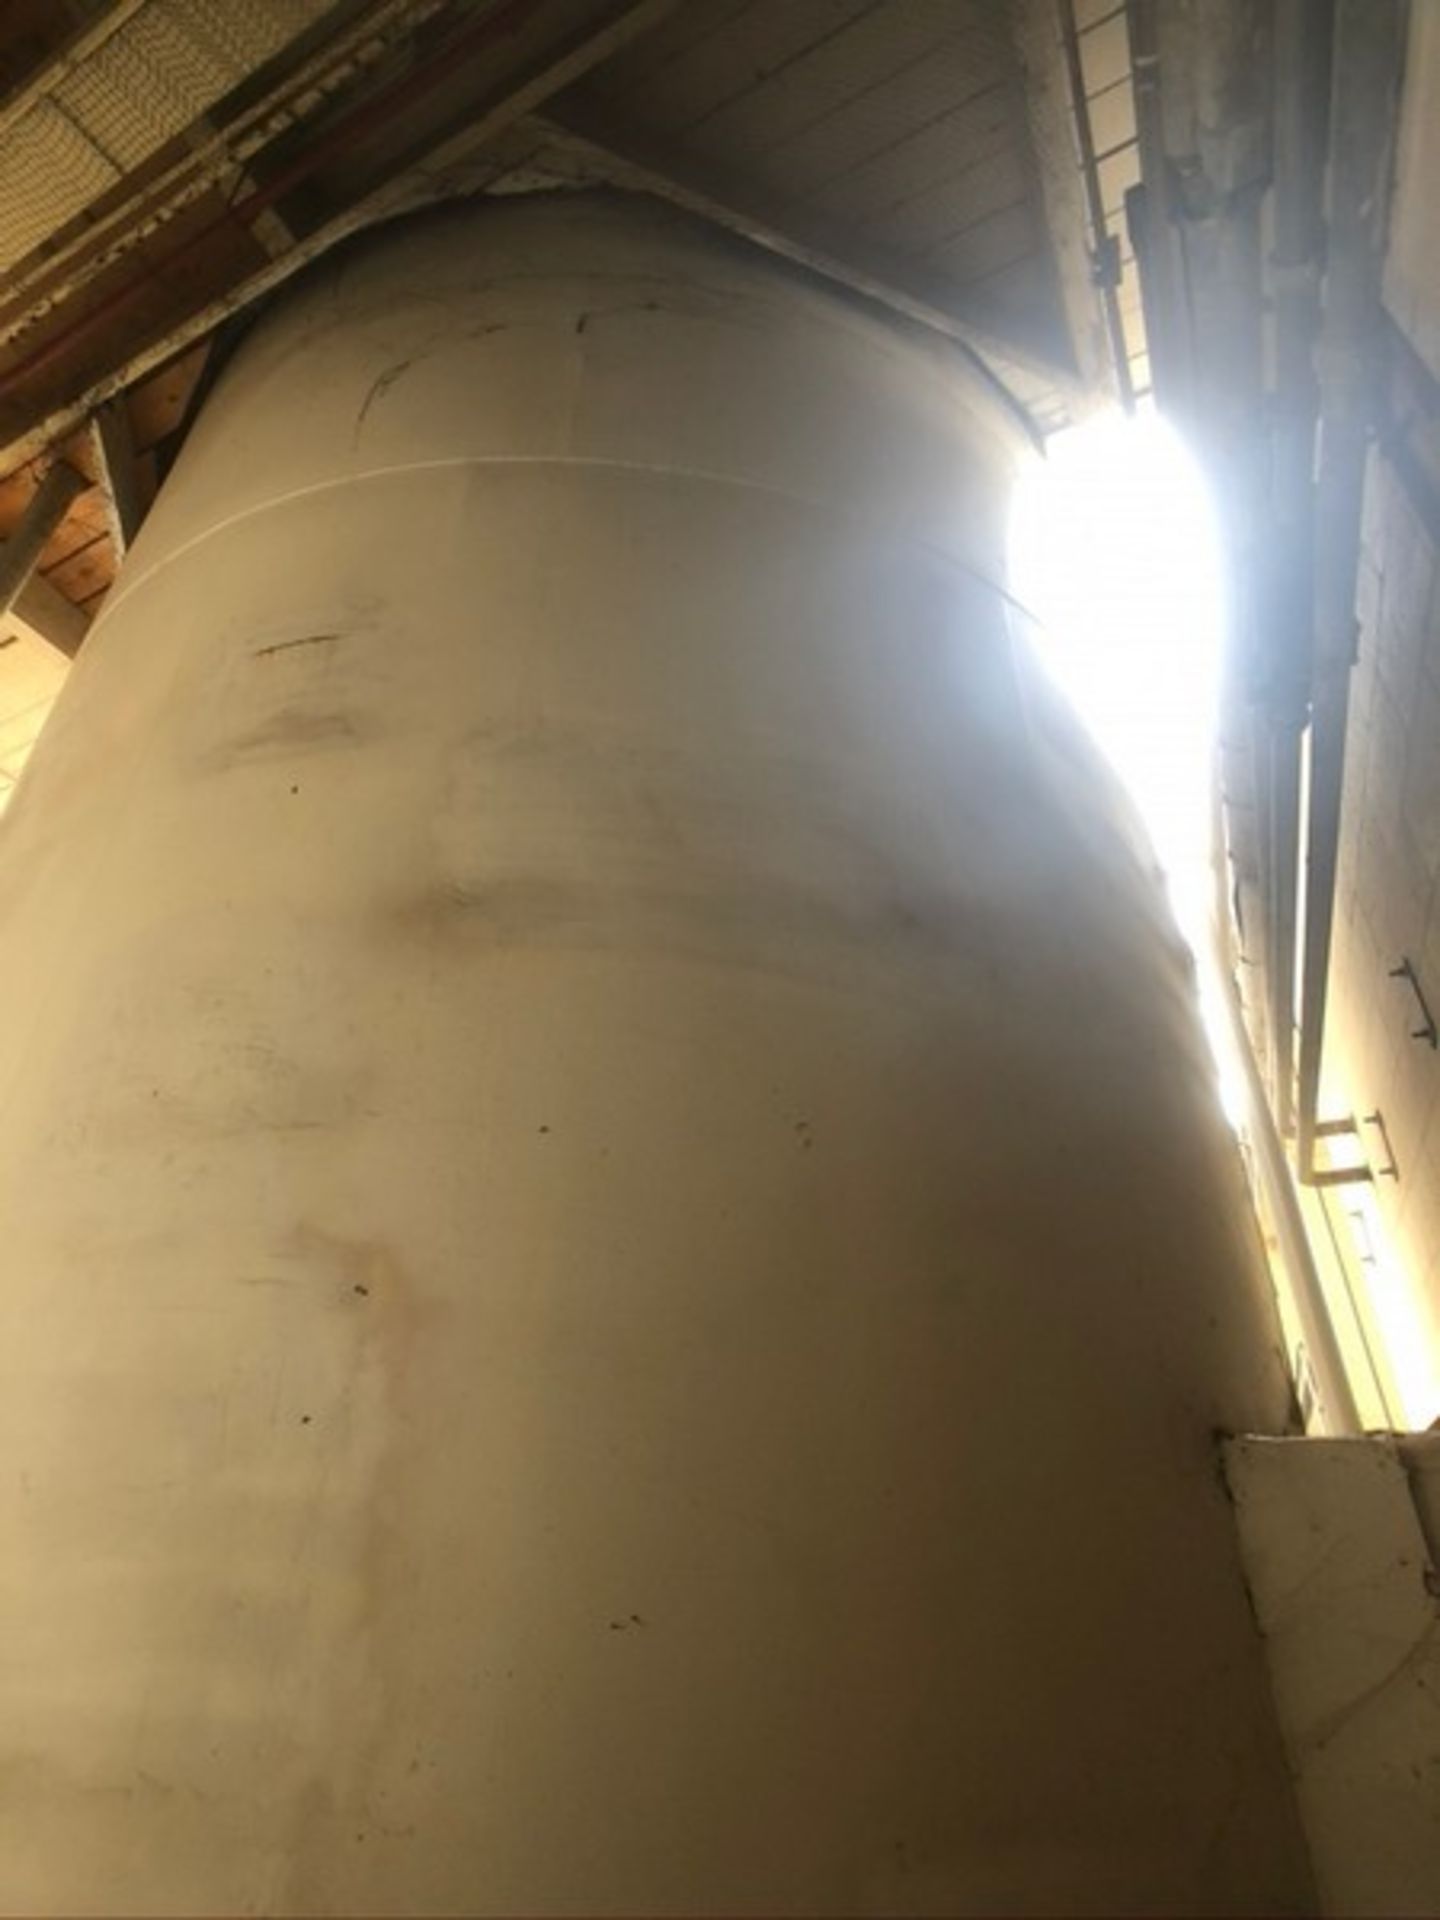 CREAMERY PACKAGE 30,000 GALLON JACKETED SILO, S/N 2961 - Image 4 of 26